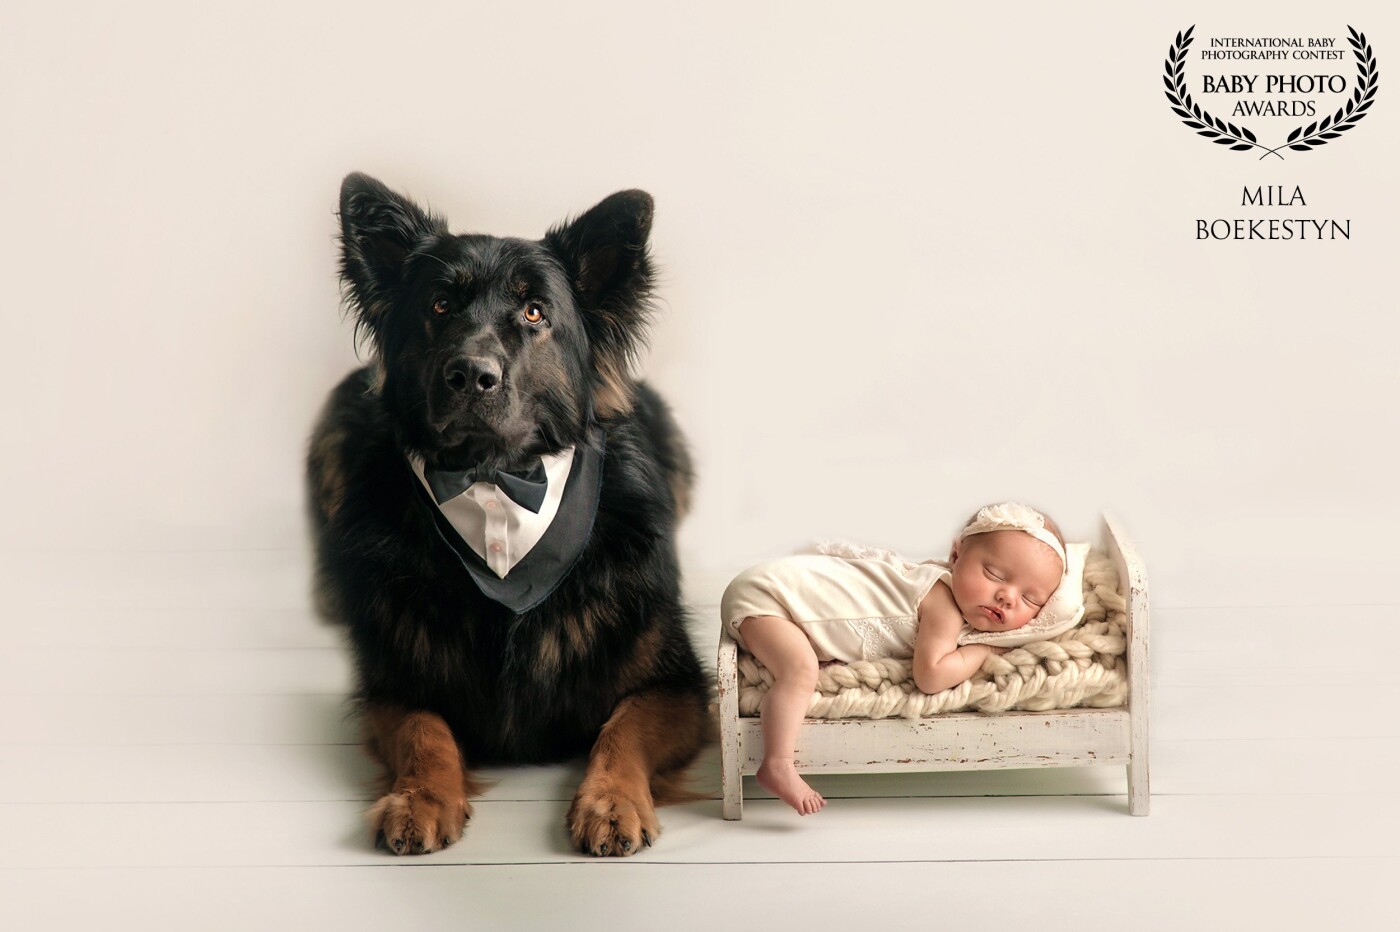 When the parents have asked me if we can include their German Shepard in the photo - I was excited, but when they have mentioned that they have a tuxedo for the dog - I got even more excited! Nothing is scary in this world when you have a furry brother like that! “Beauty and the Beast” at its best!